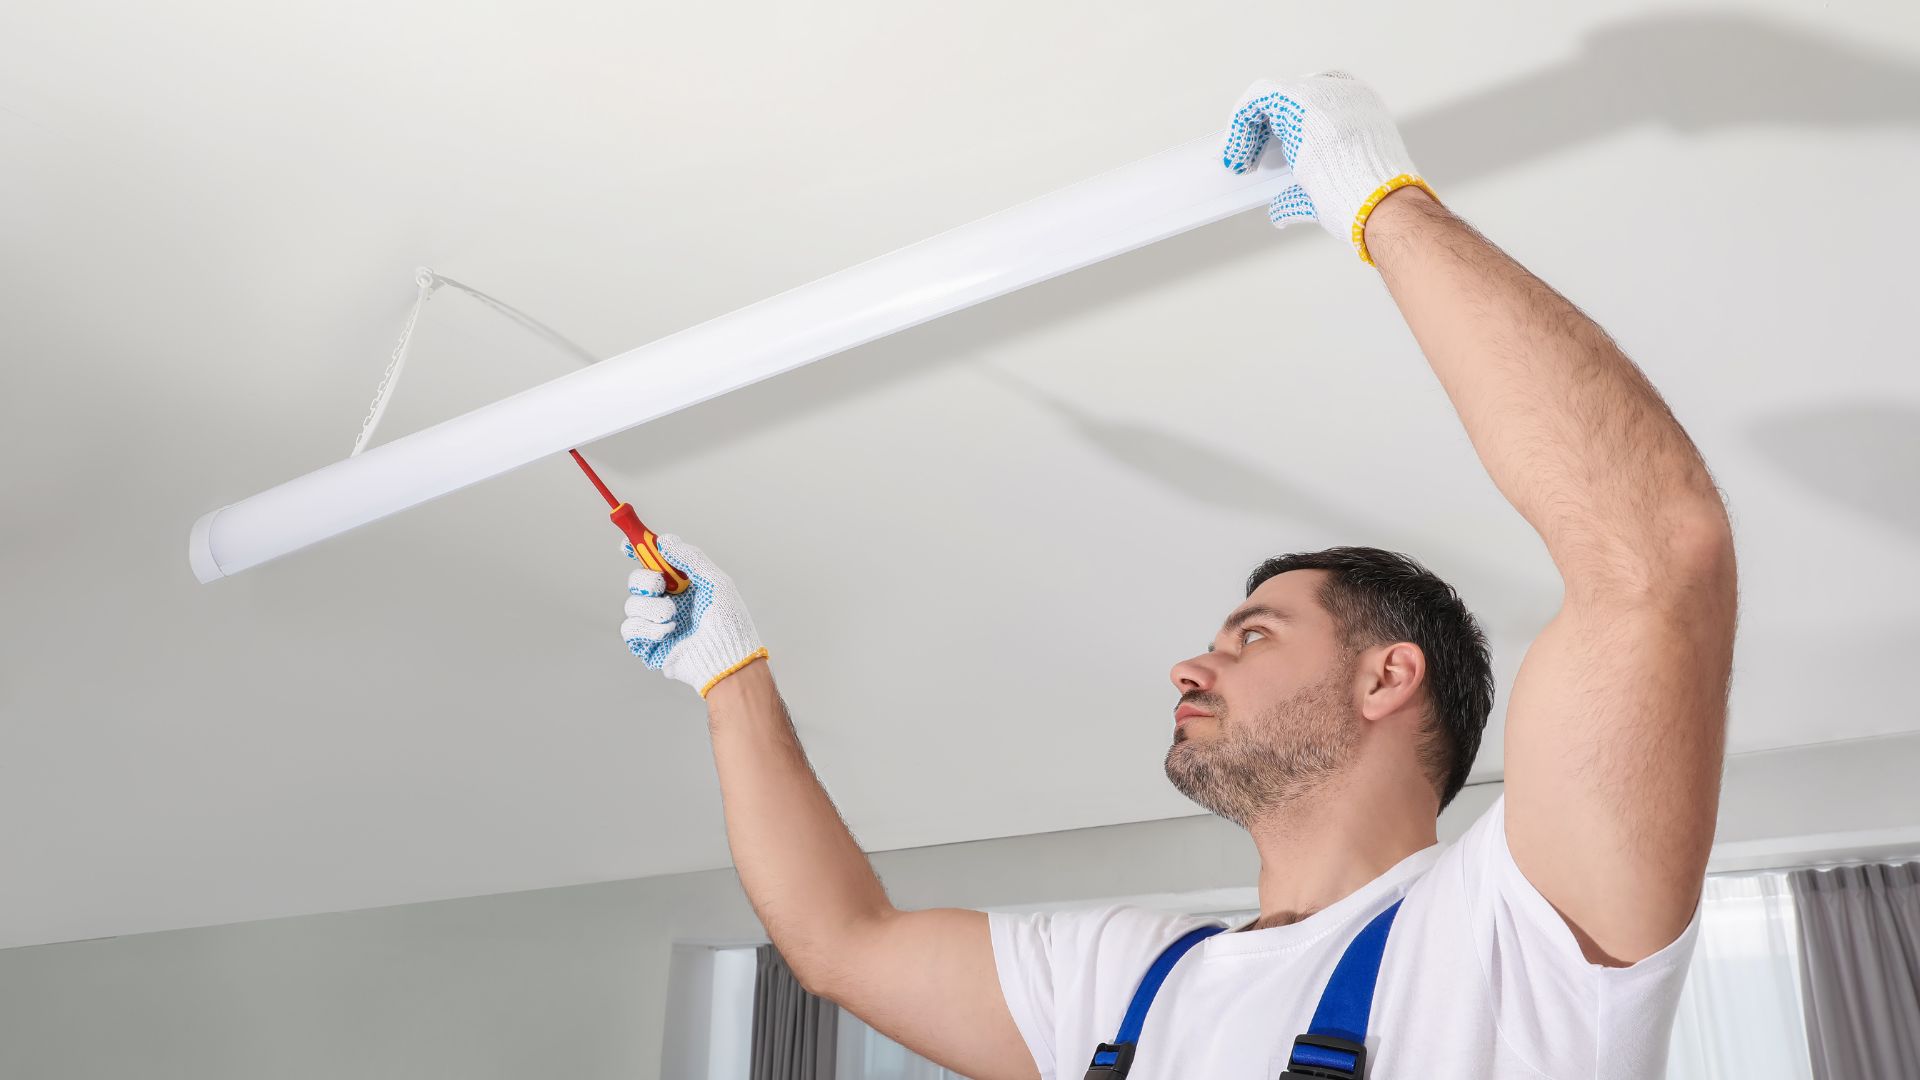 Advantages of Installing and Replacing Light Fixtures: Electrical Services for Enhanced Illumination